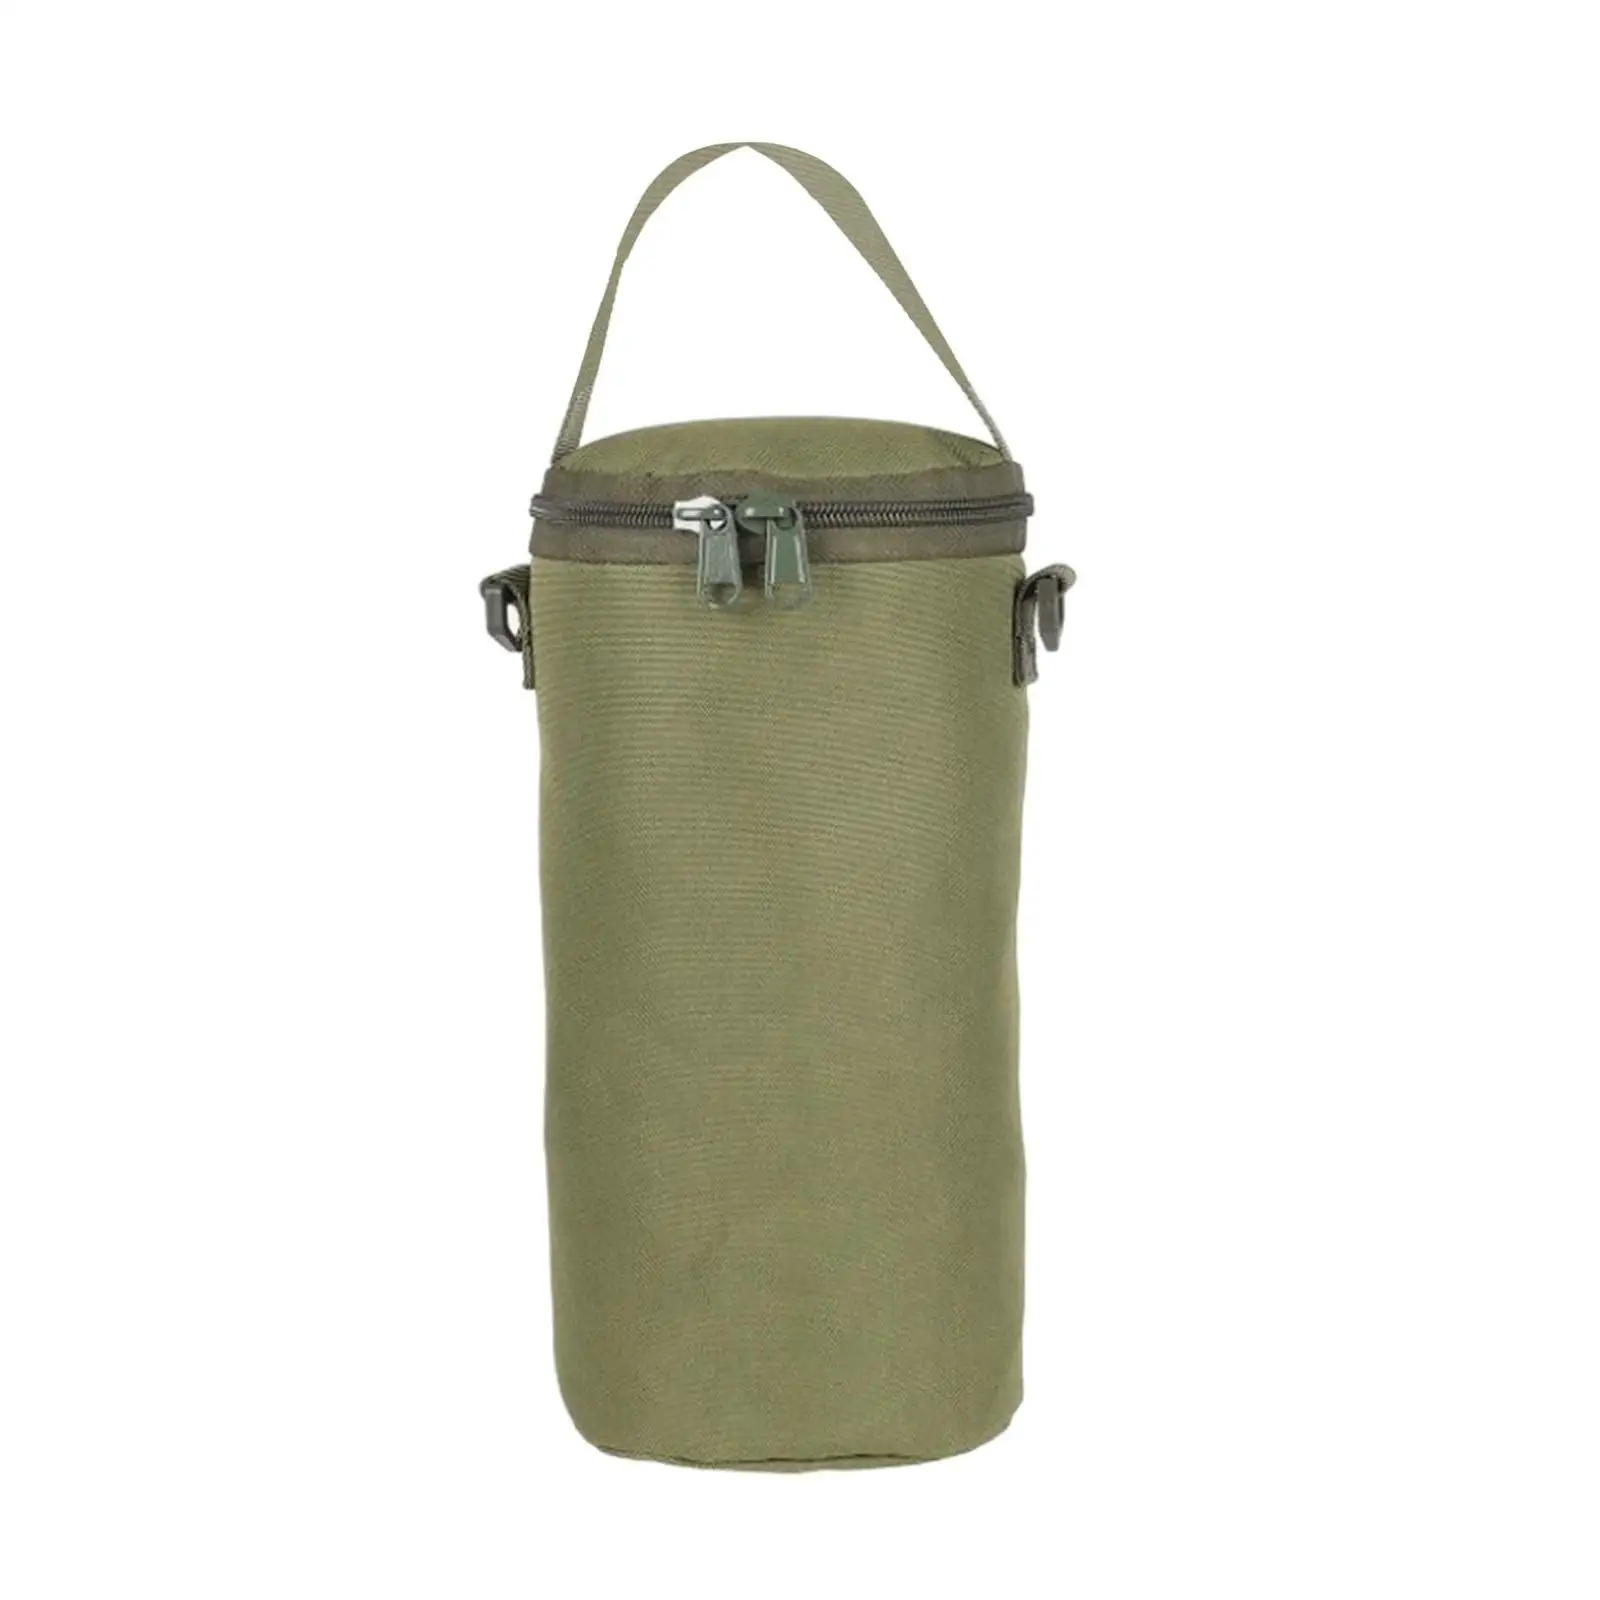 2x Gas Storage Bag Anti-Collision Gas Cylinder Lantern Protective Cover  for Camping Outdoor